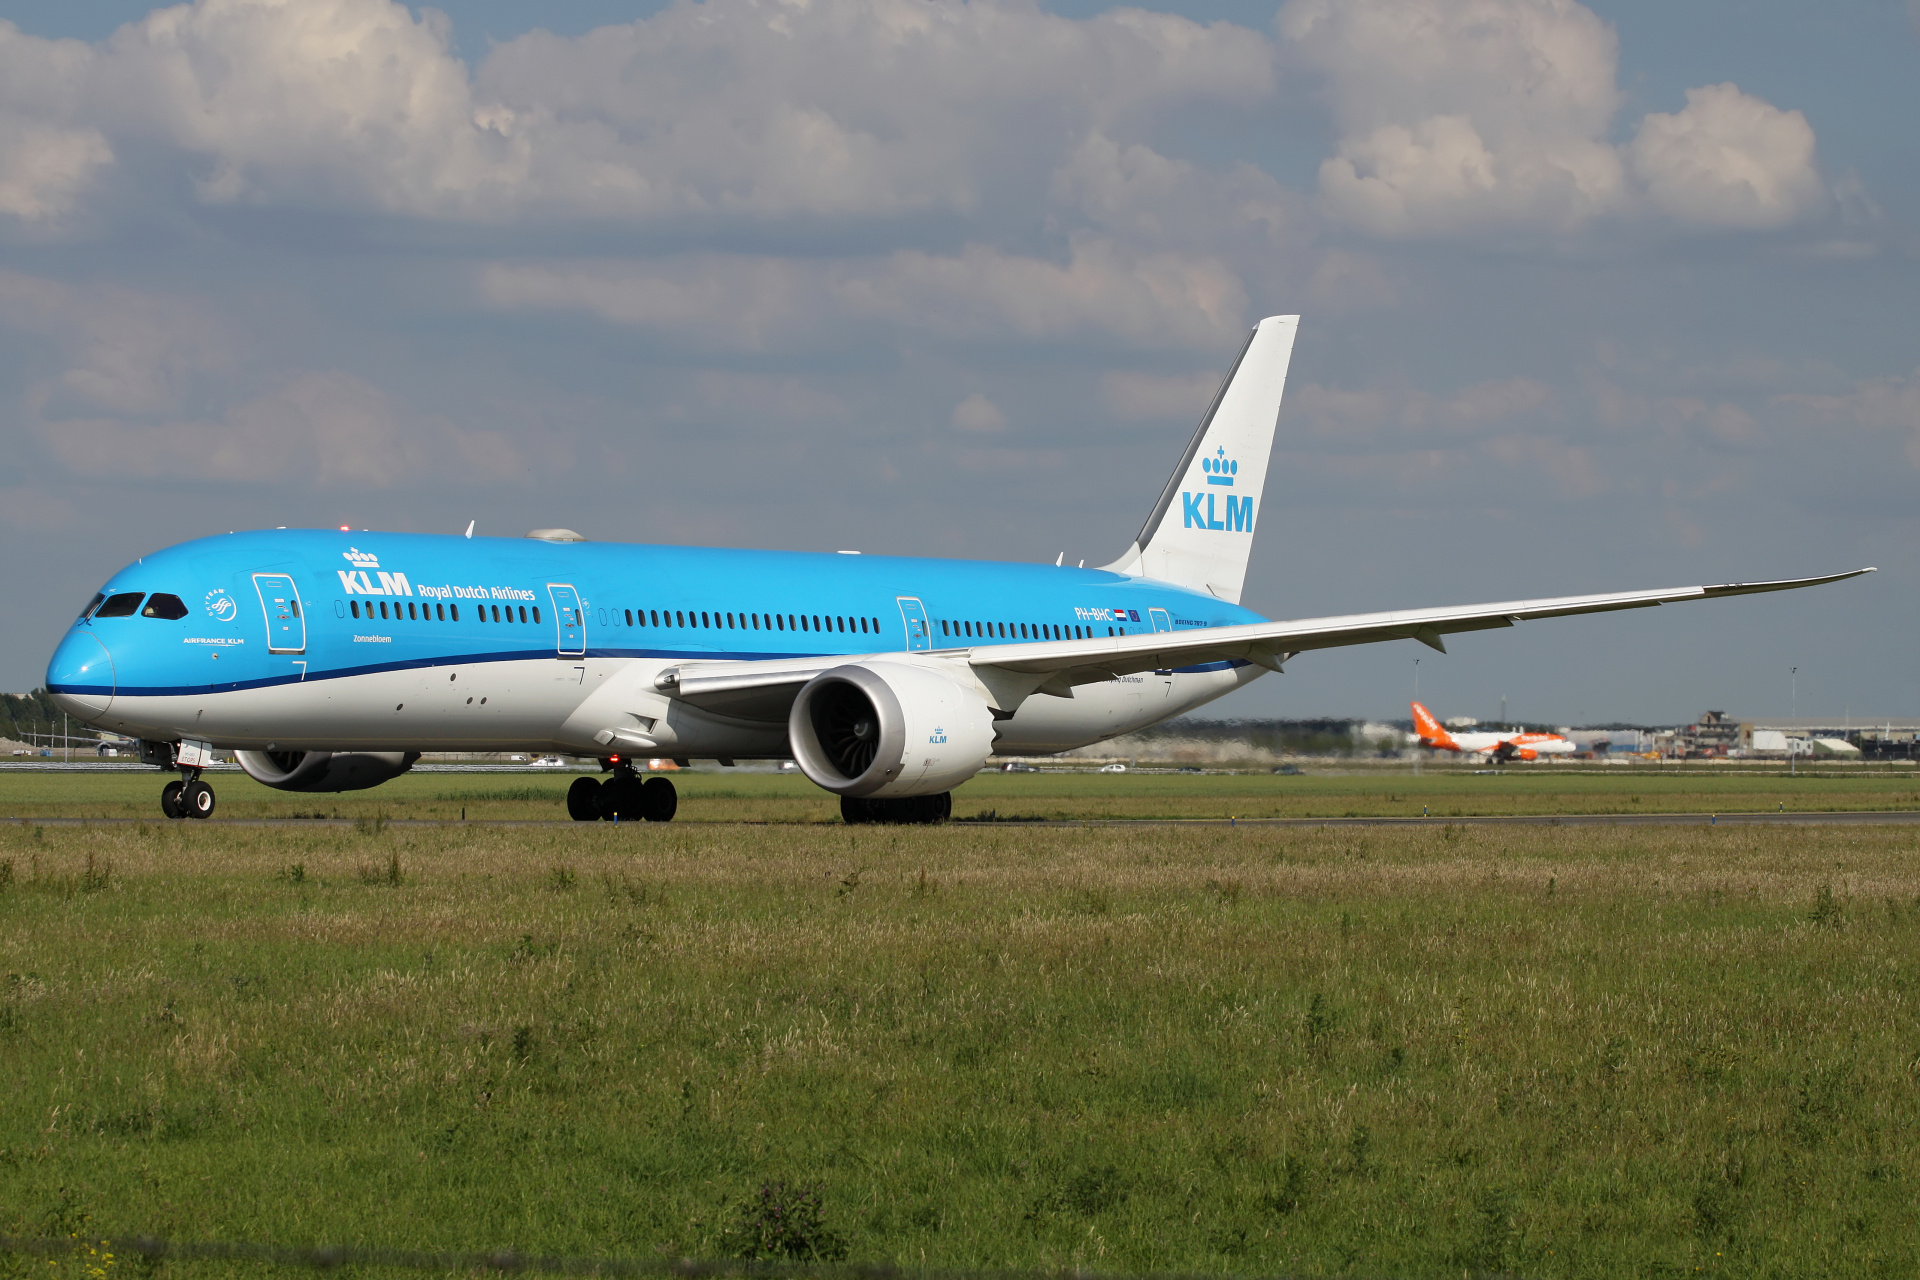 PH-BHC (Aircraft » Schiphol Spotting » Boeing 787-9 Dreamliner » KLM Royal Dutch Airlines)